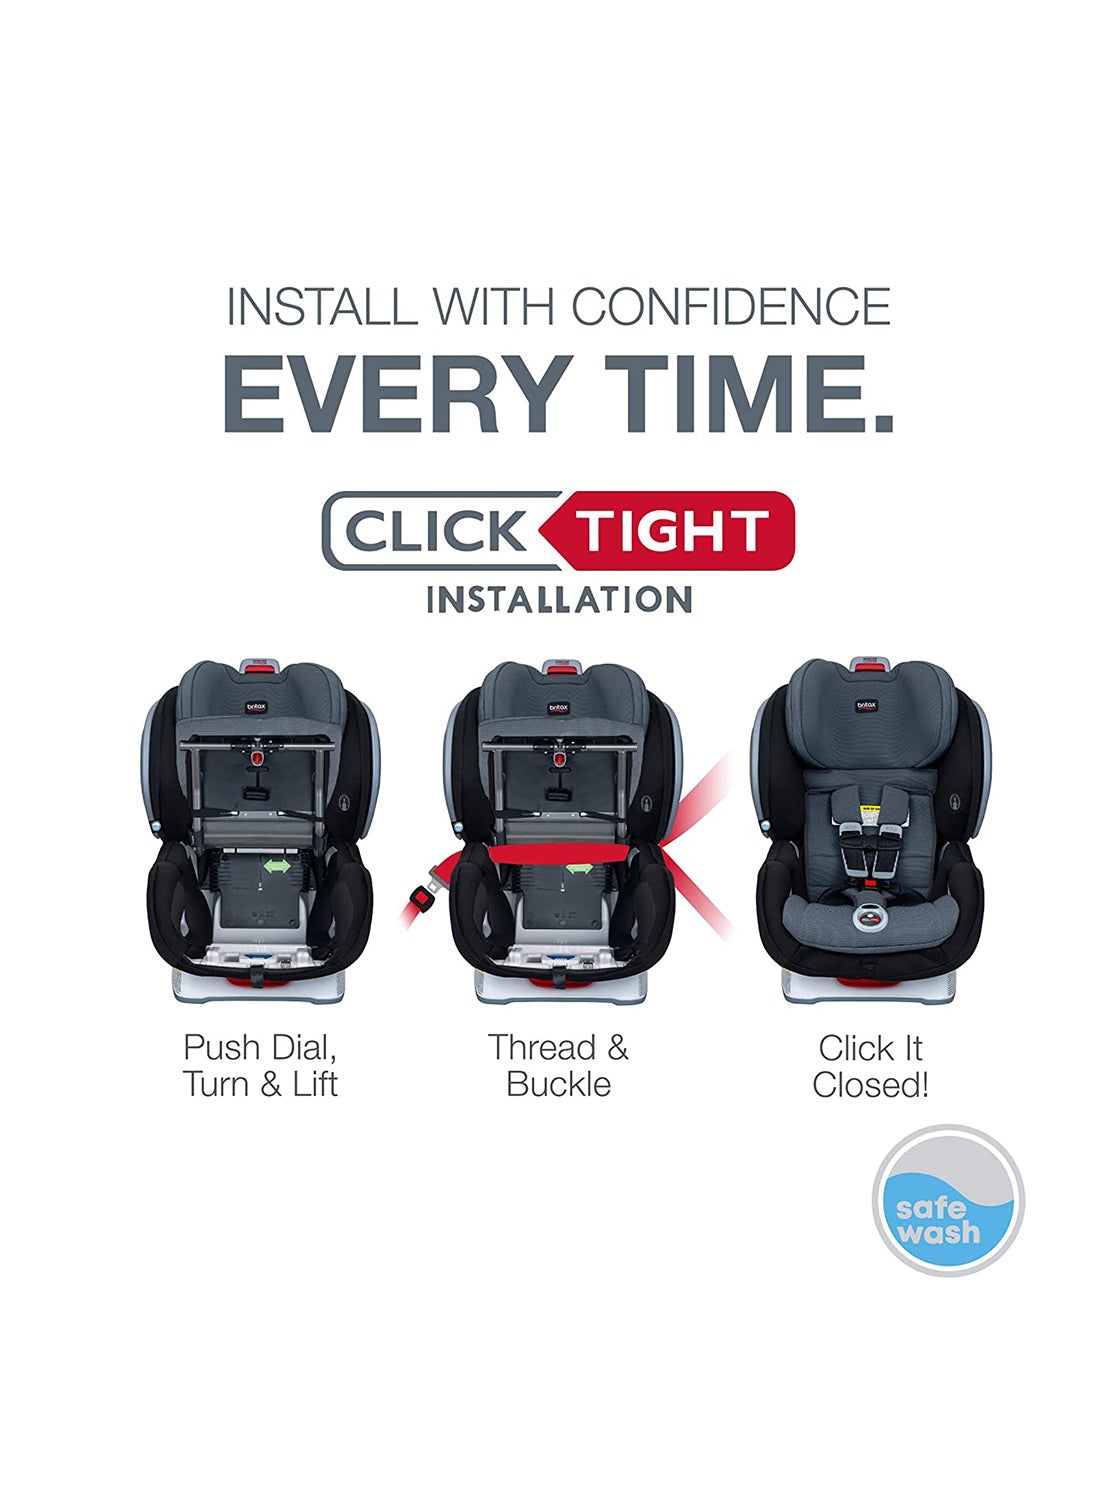 BRITAX Advocate ClickTight Convertible Car Seat, -- ANB Baby